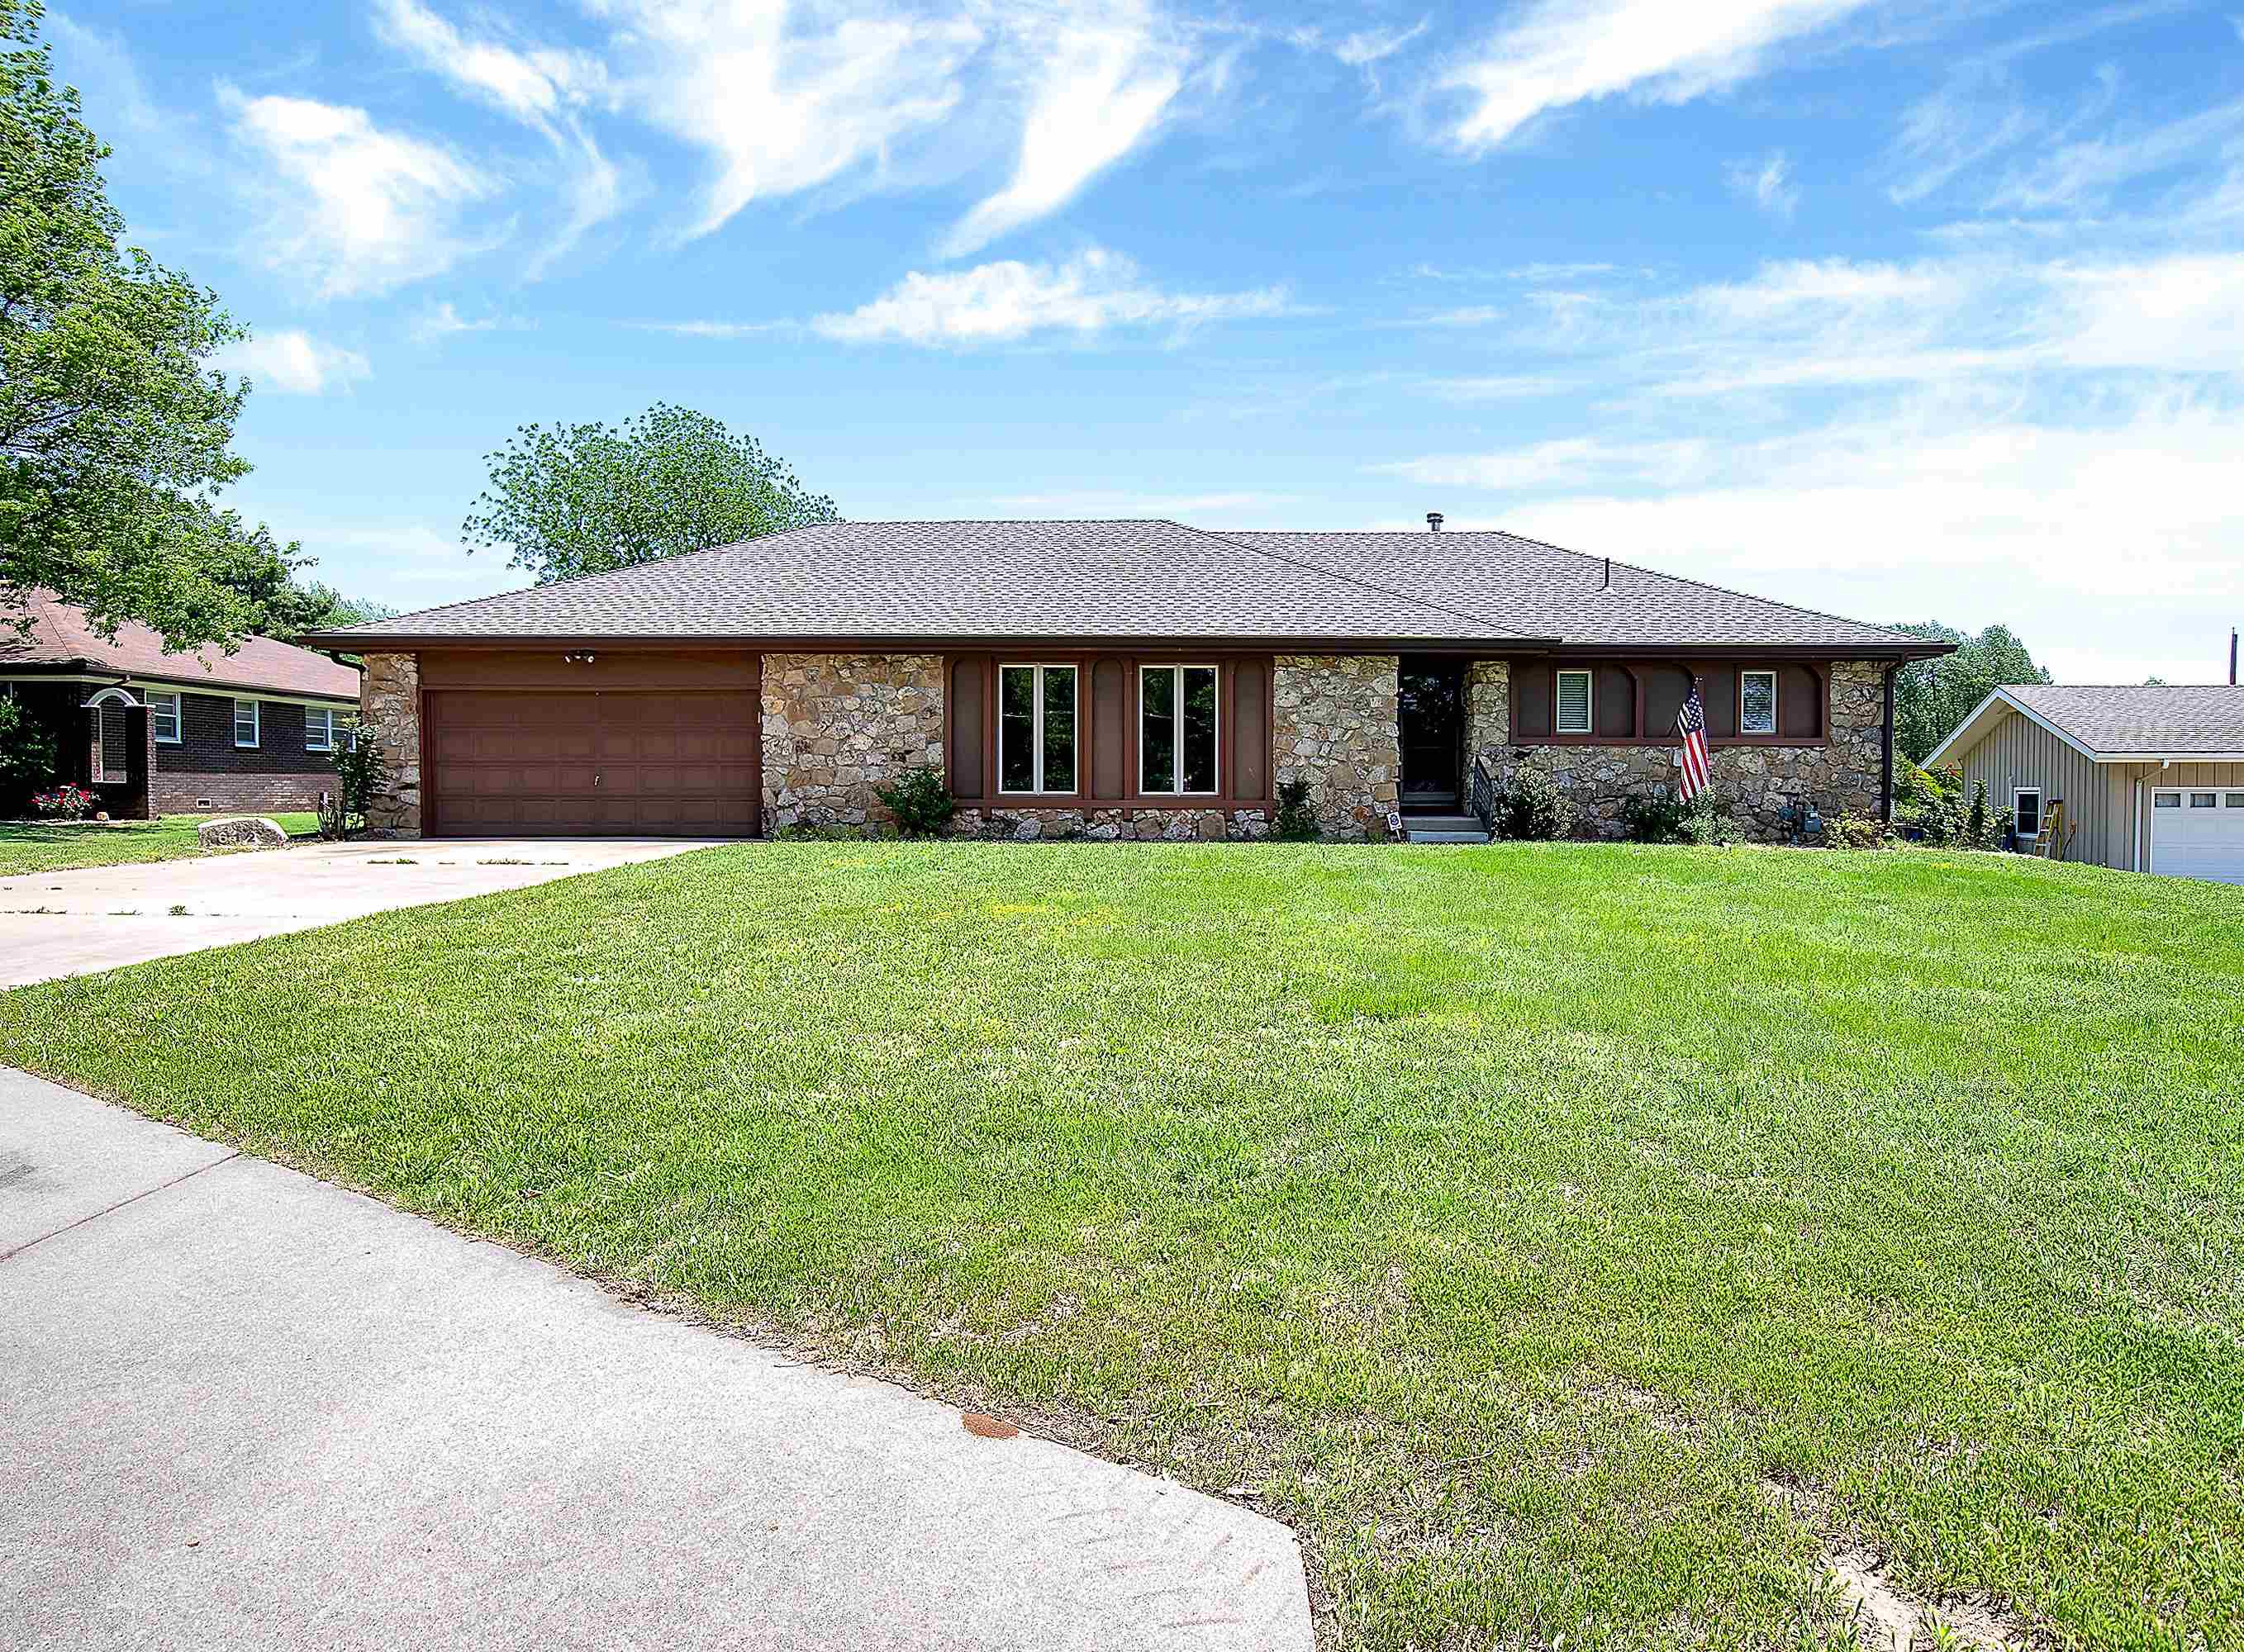 Welcome to this spacious 3 bedroom 2.5 bathroom ranch home in west Wichita just a half mile north of